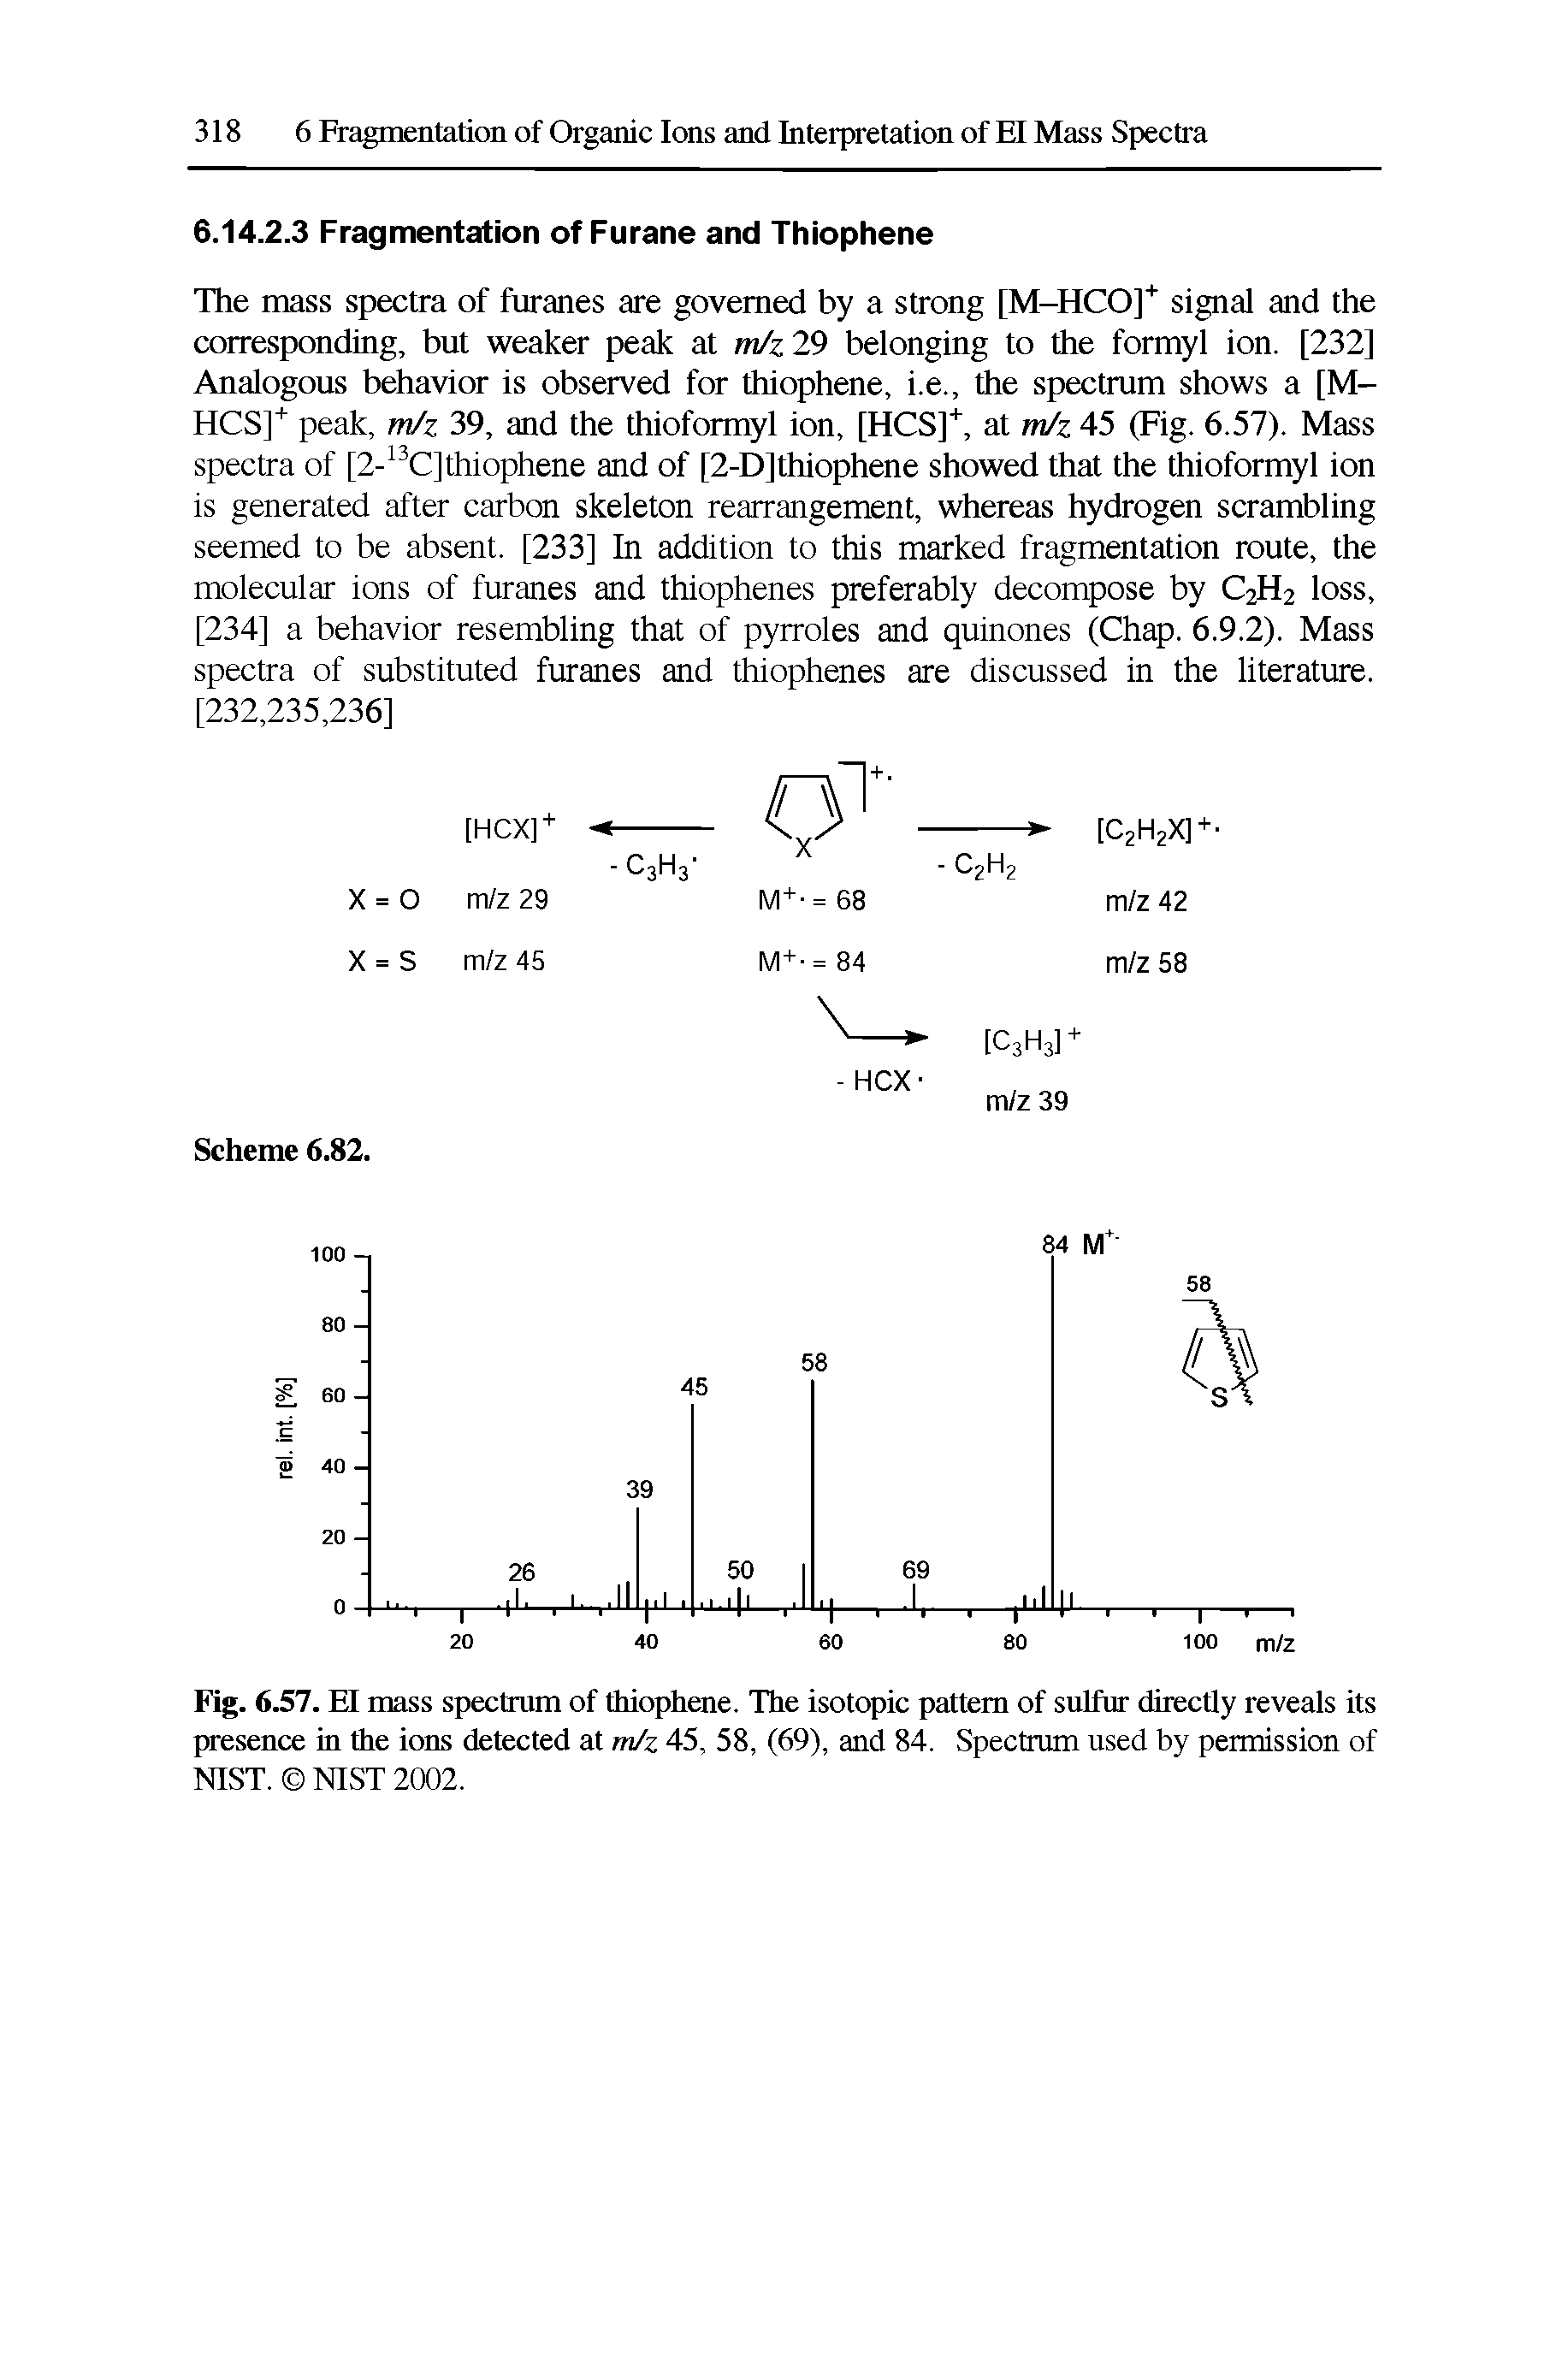 Fig. 6.57. El mass spectmm of thiophene. The isotopic pattern of sulfur directly reveals its presence in the ions detected at m/z 45, 58, (69), and 84. Spectrum used by permission of NIST. NIST 2002.